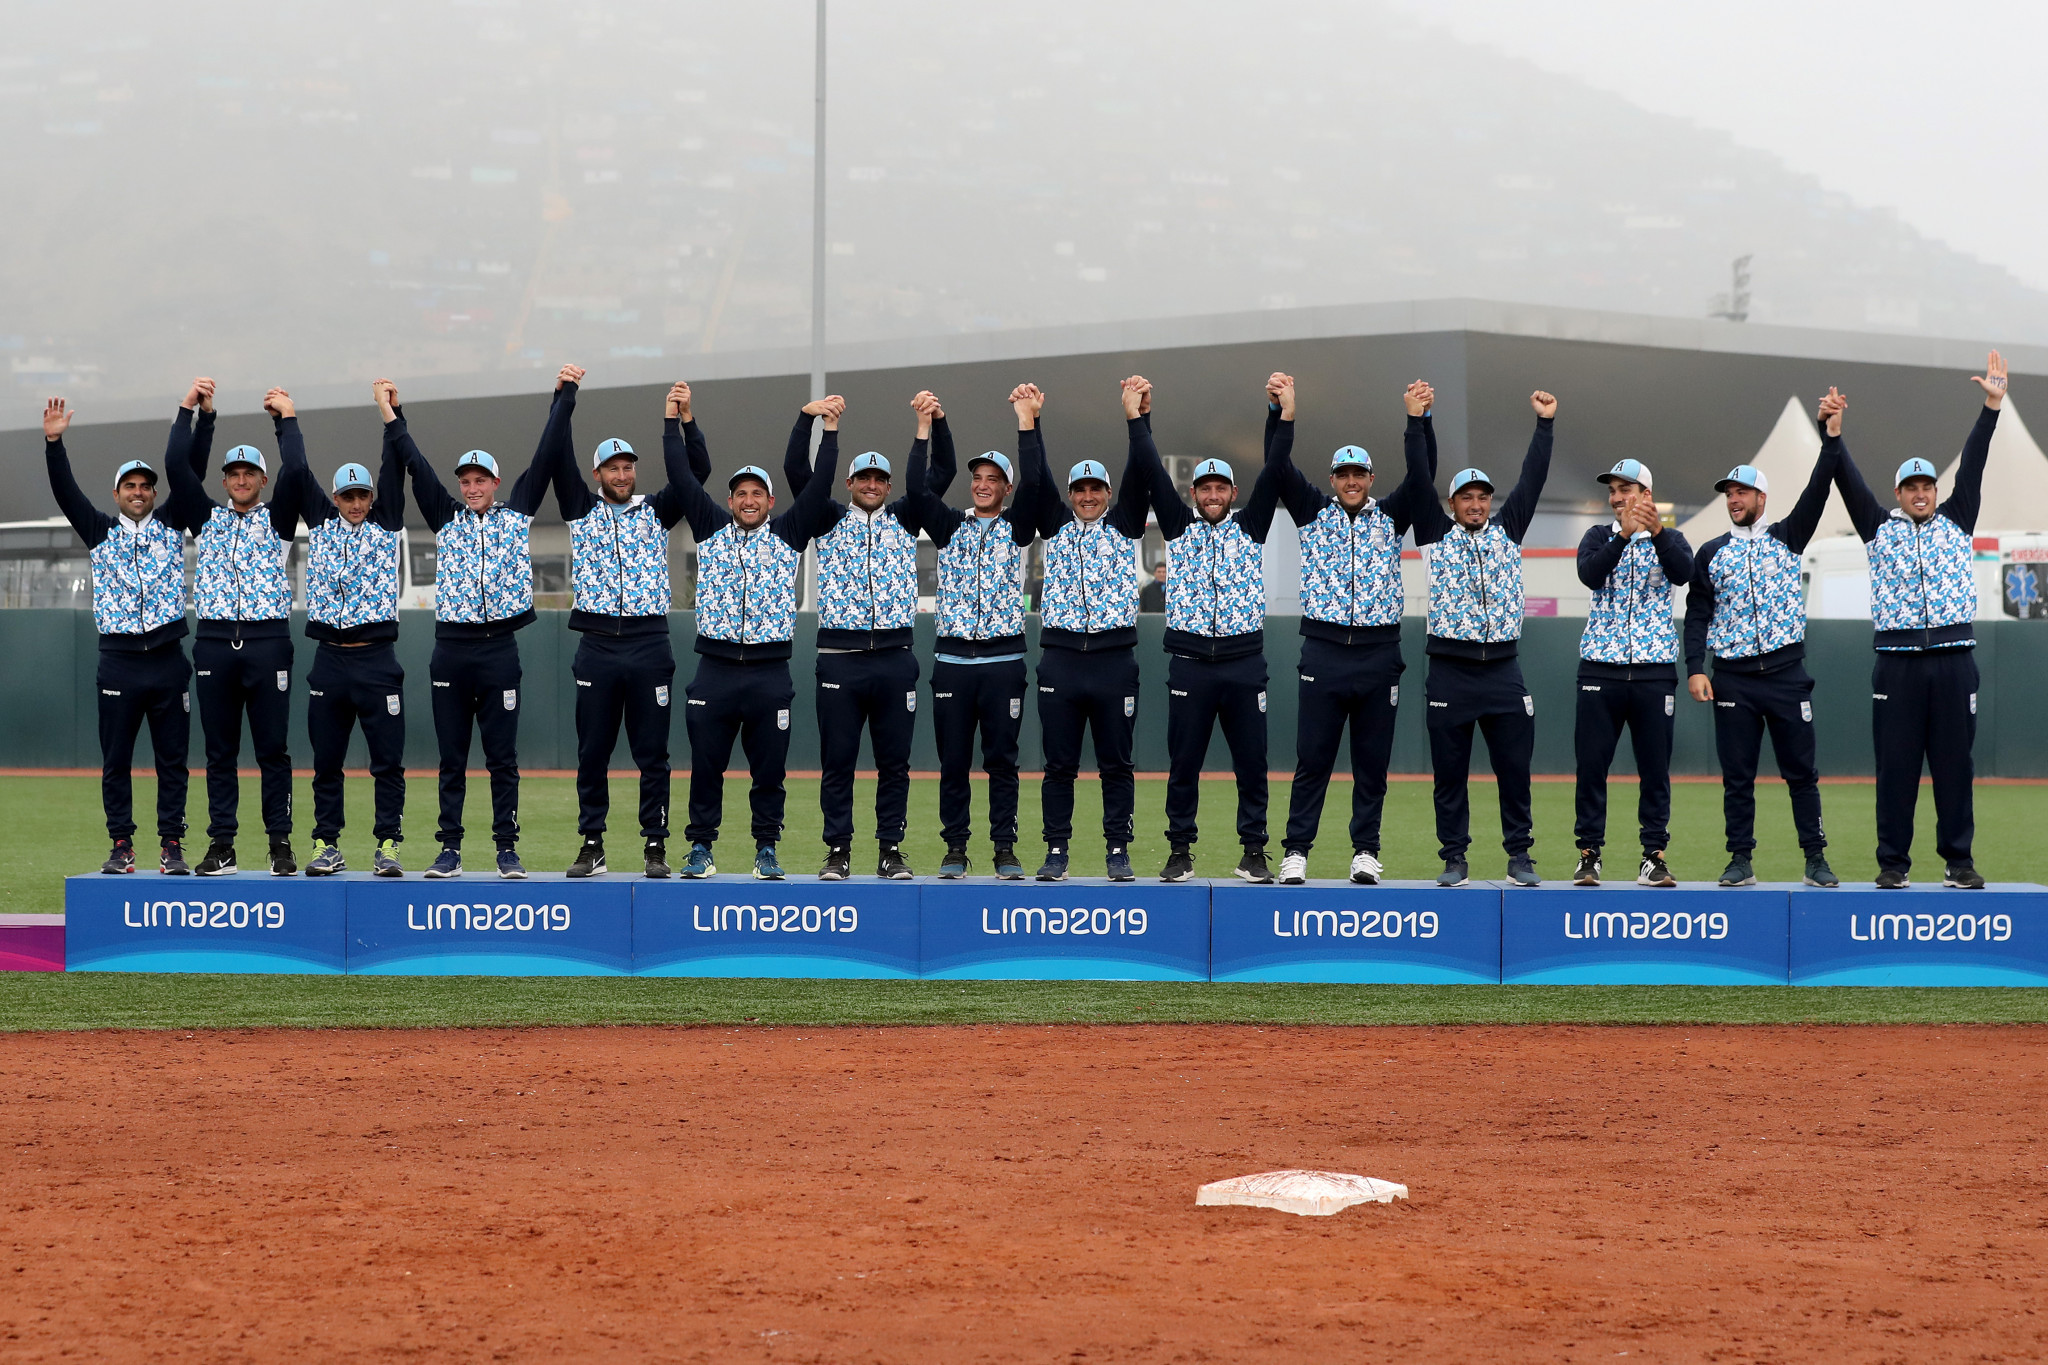 In senior men's softball, Argentina are the reigning word and Pan-American champions ©Getty Images